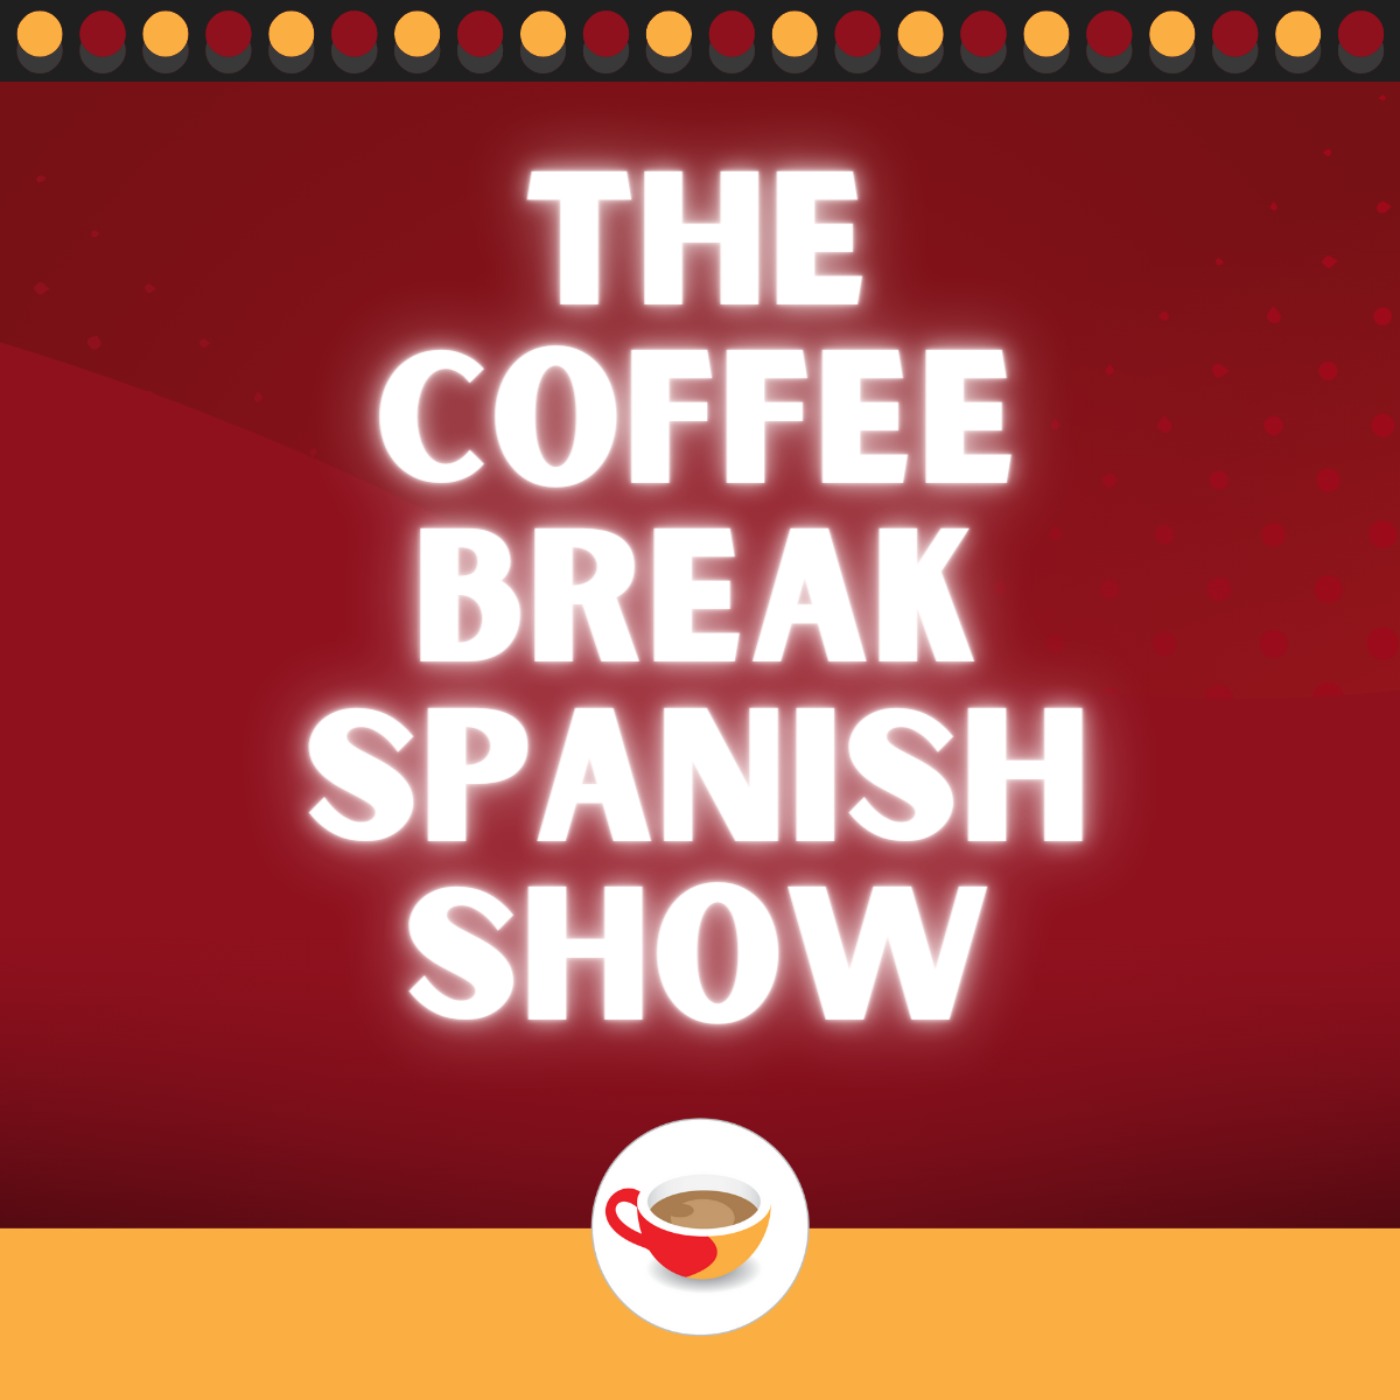 Where do adverbs go? - Spanish sentence structure | The Coffee Break Spanish Show 1.05